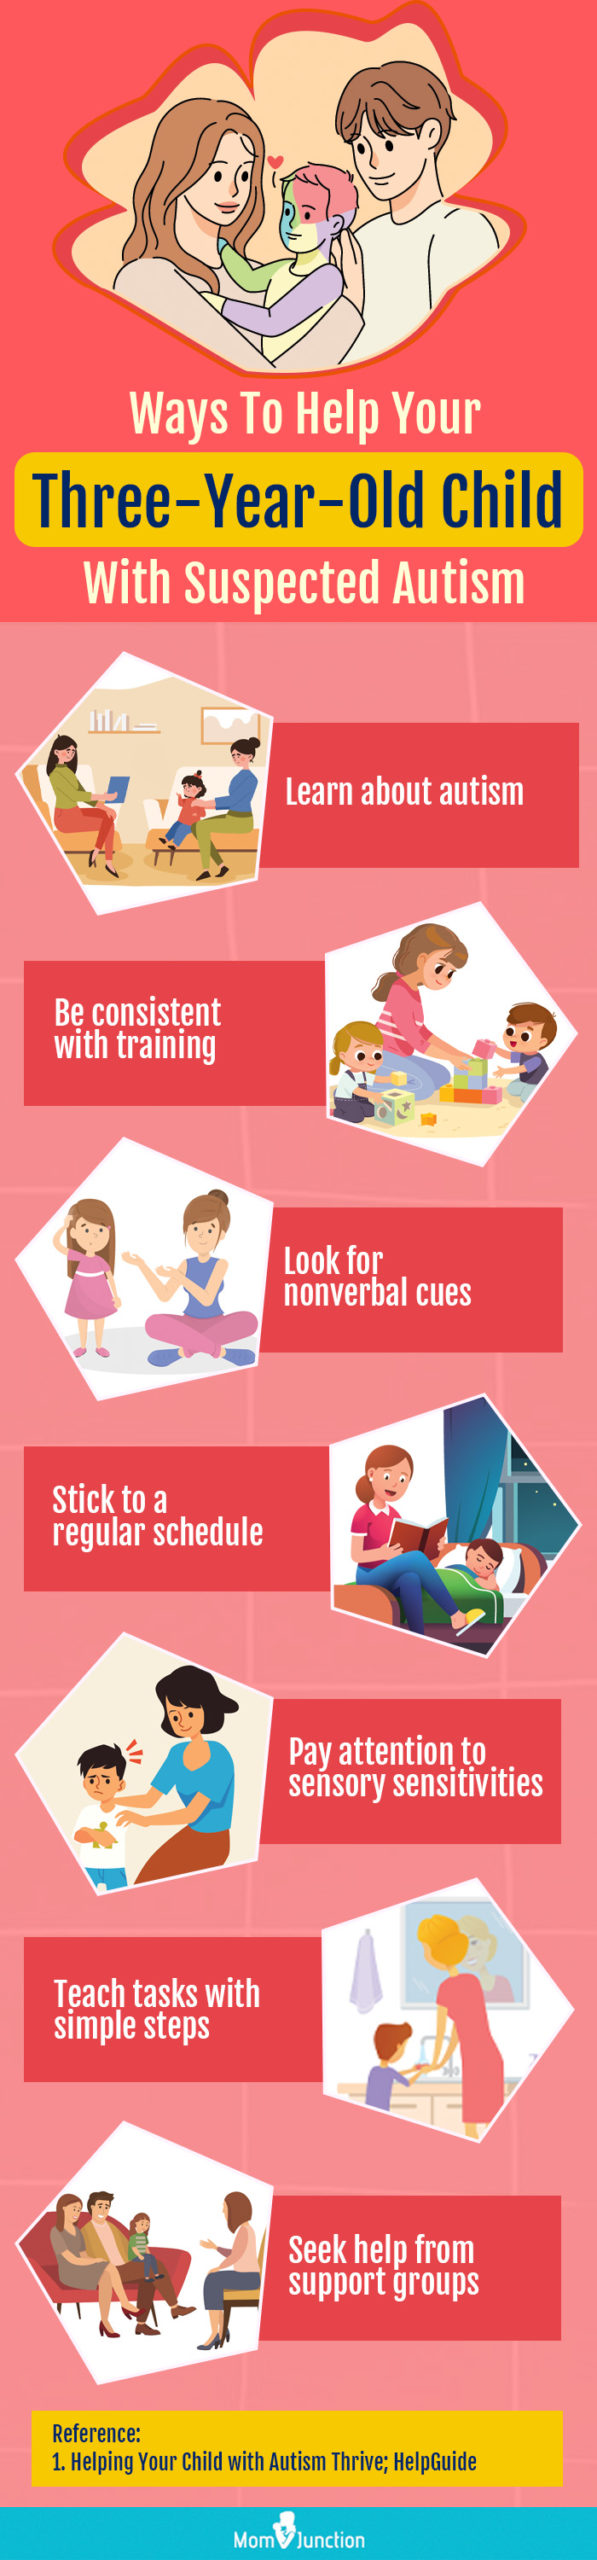 ways to help your three year old child with suspected autism (infographic)